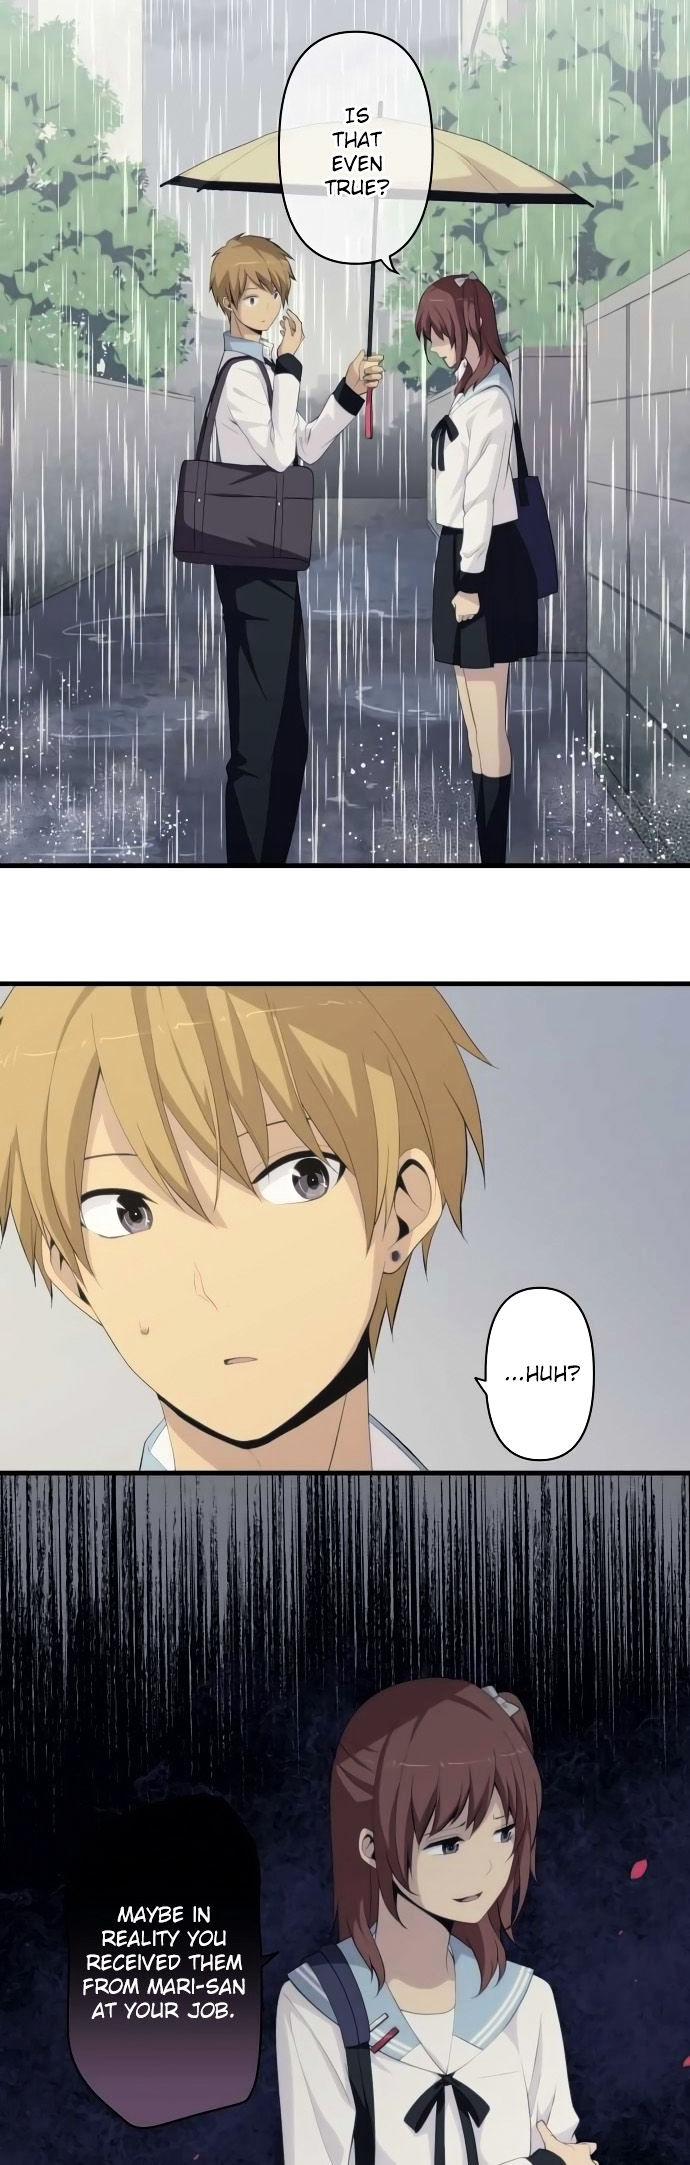 Relife 165 6